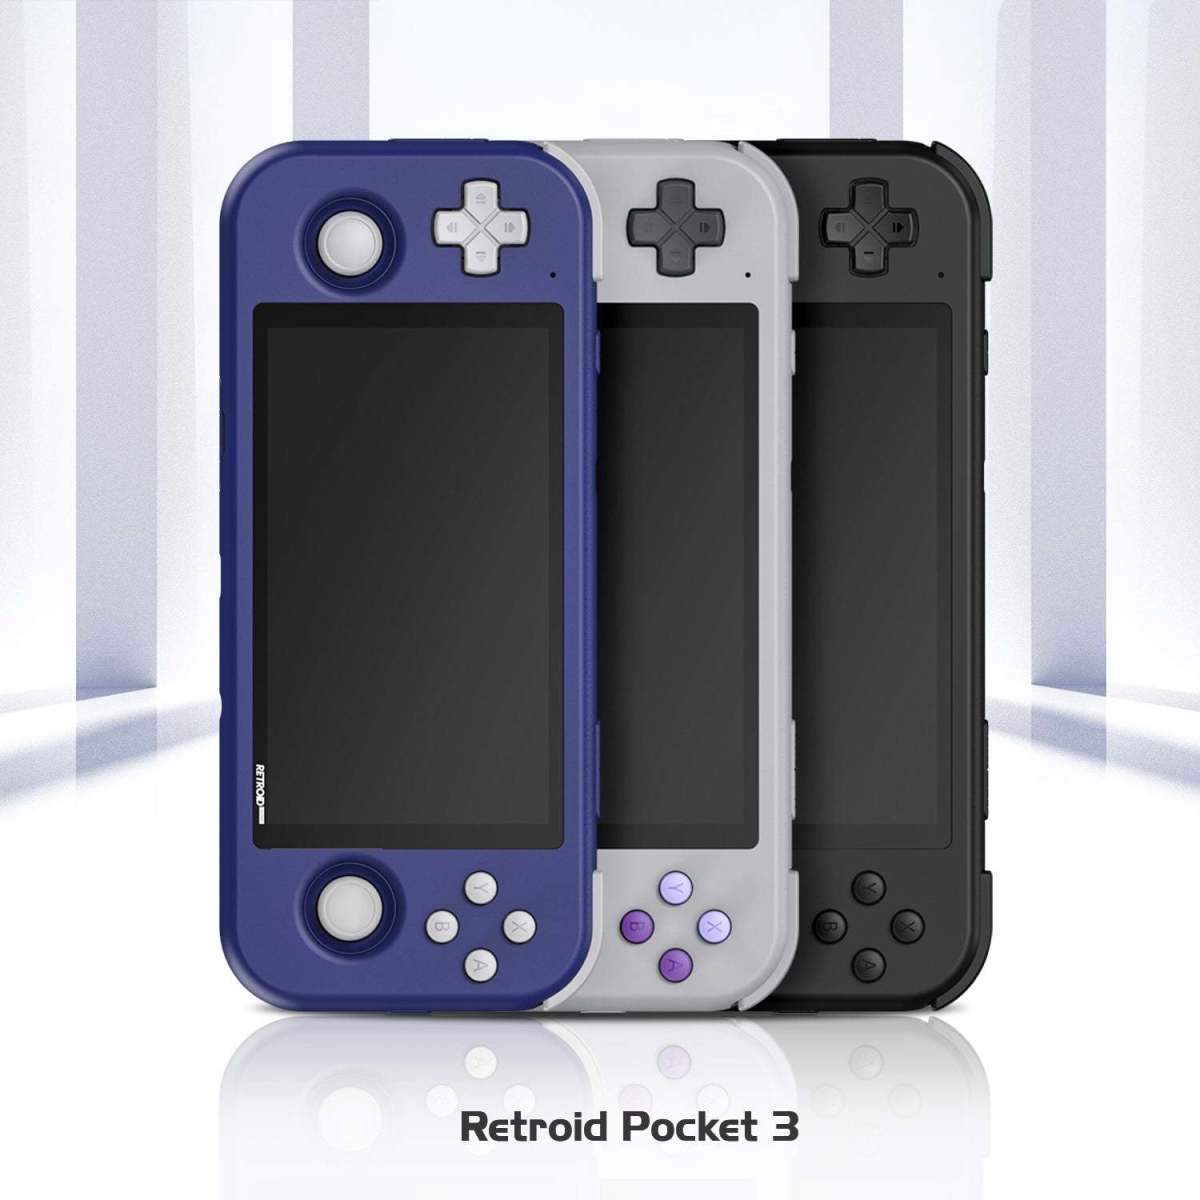 retroid-pocket-3-review-should-you-buy-it